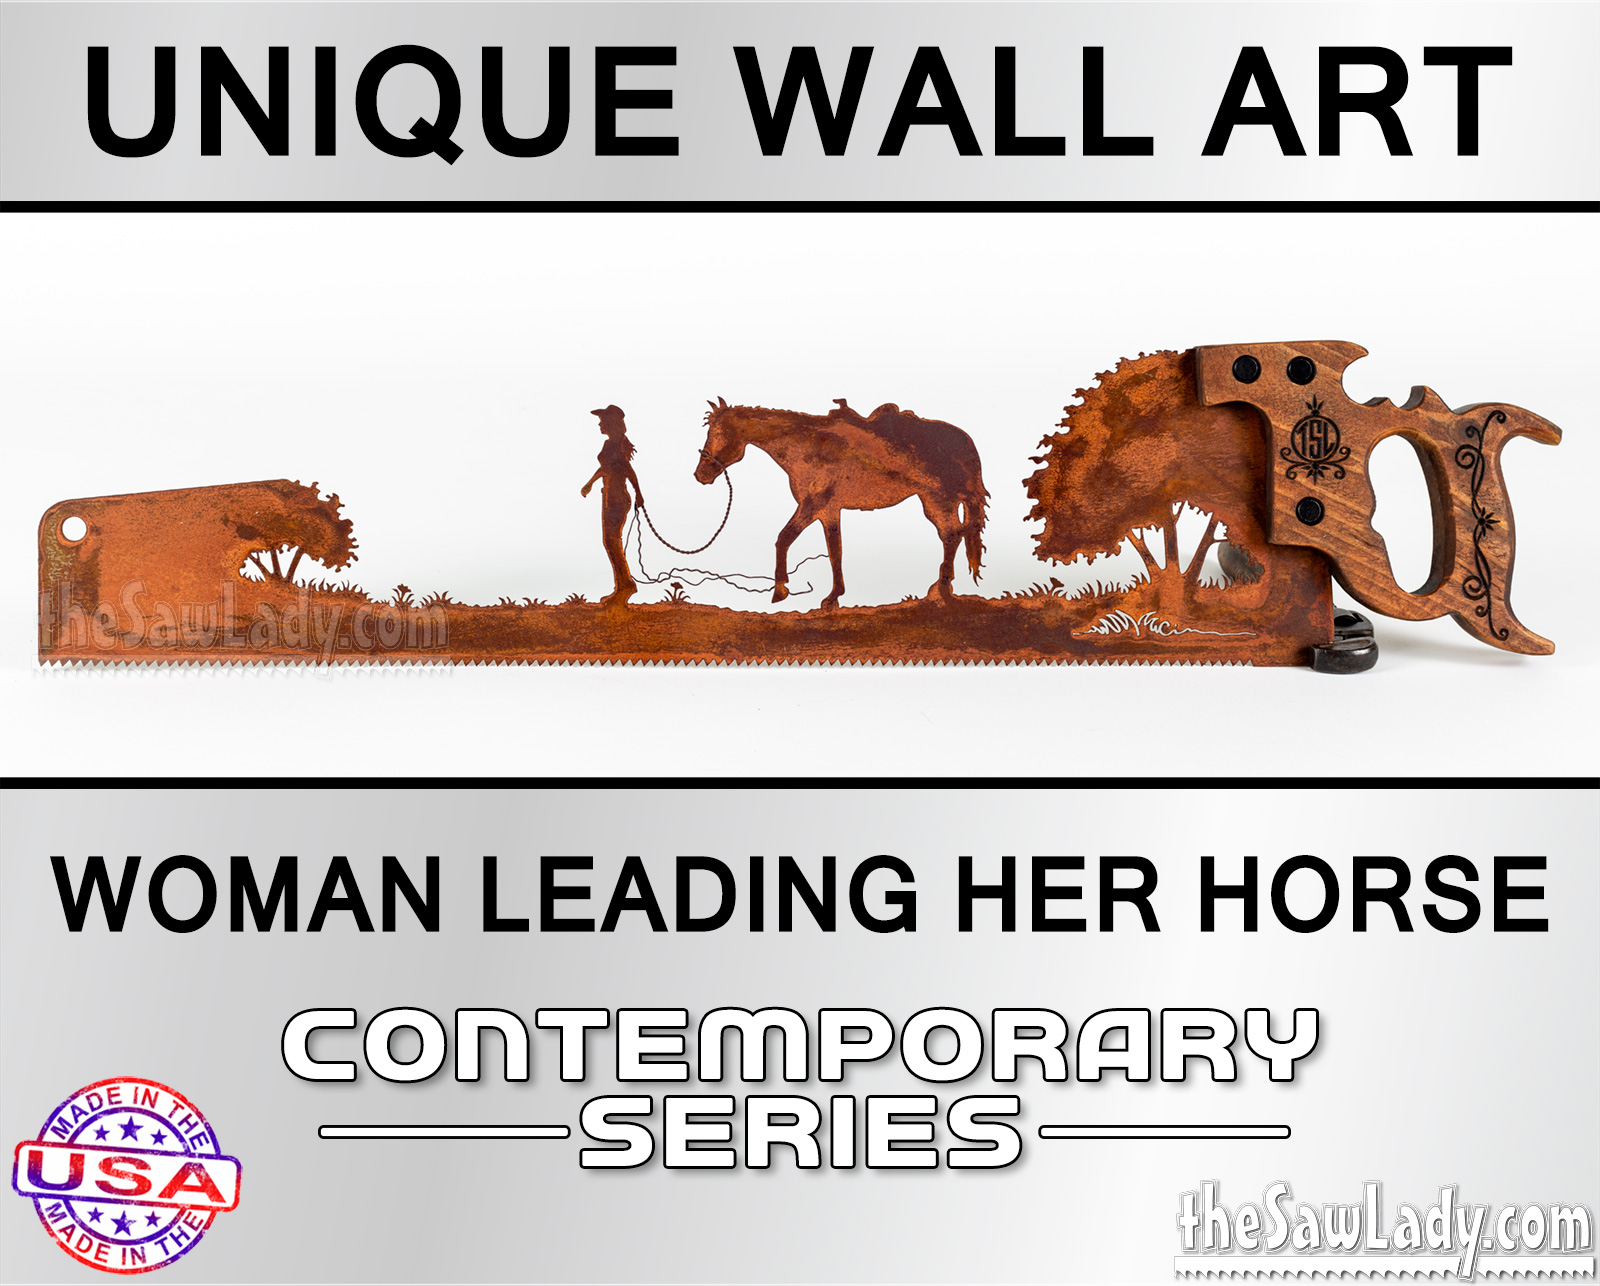 Woman-leading-her-horse-metal-wall-art-saw